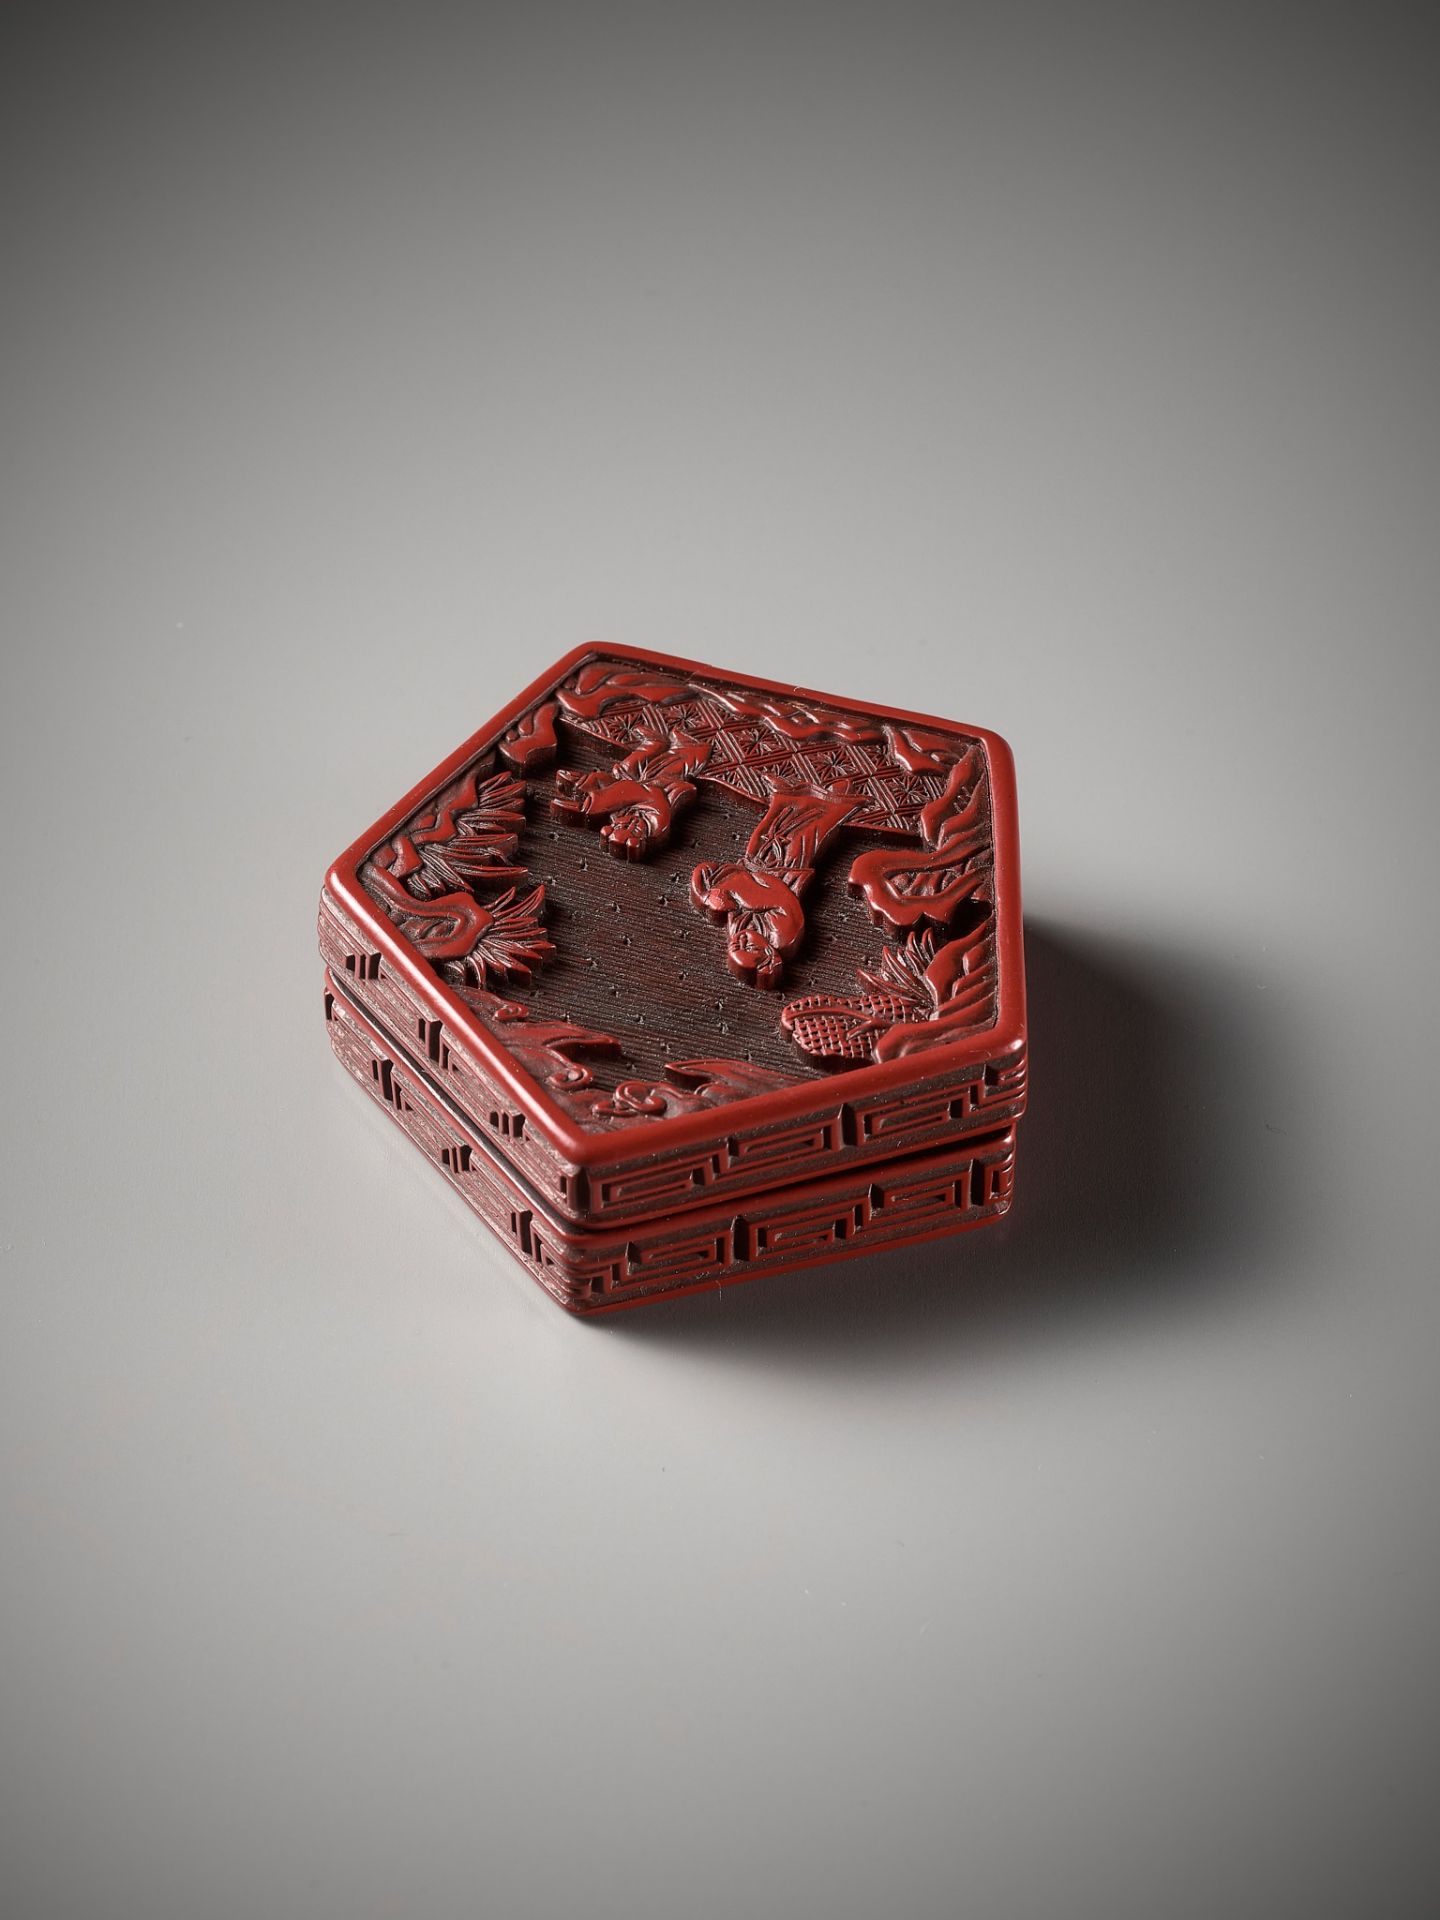 A SMALL CINNABAR LACQUER BOX AND COVER, YUAN TO MID-MING DYNASTY - Image 9 of 12